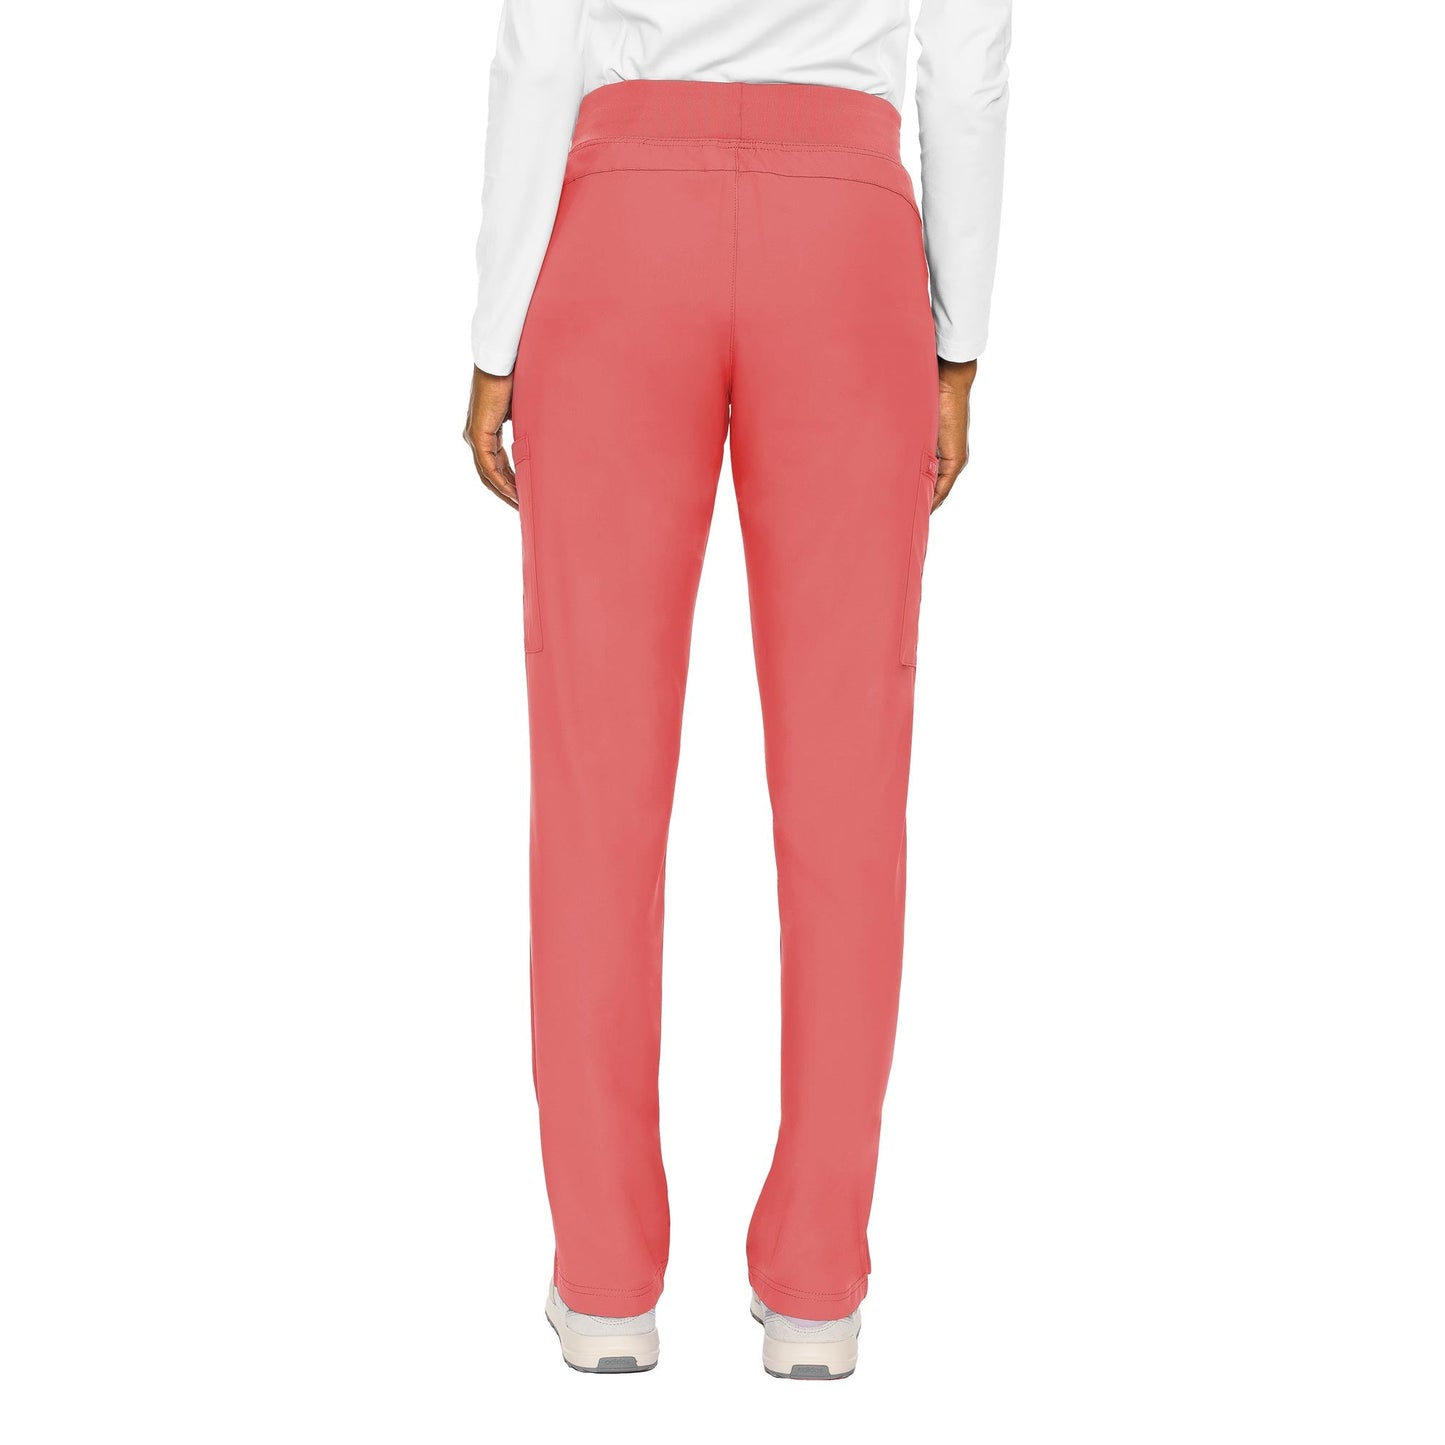 Med Couture Insight Zipper Pant Regular Length (16 colors in XXS-XL)